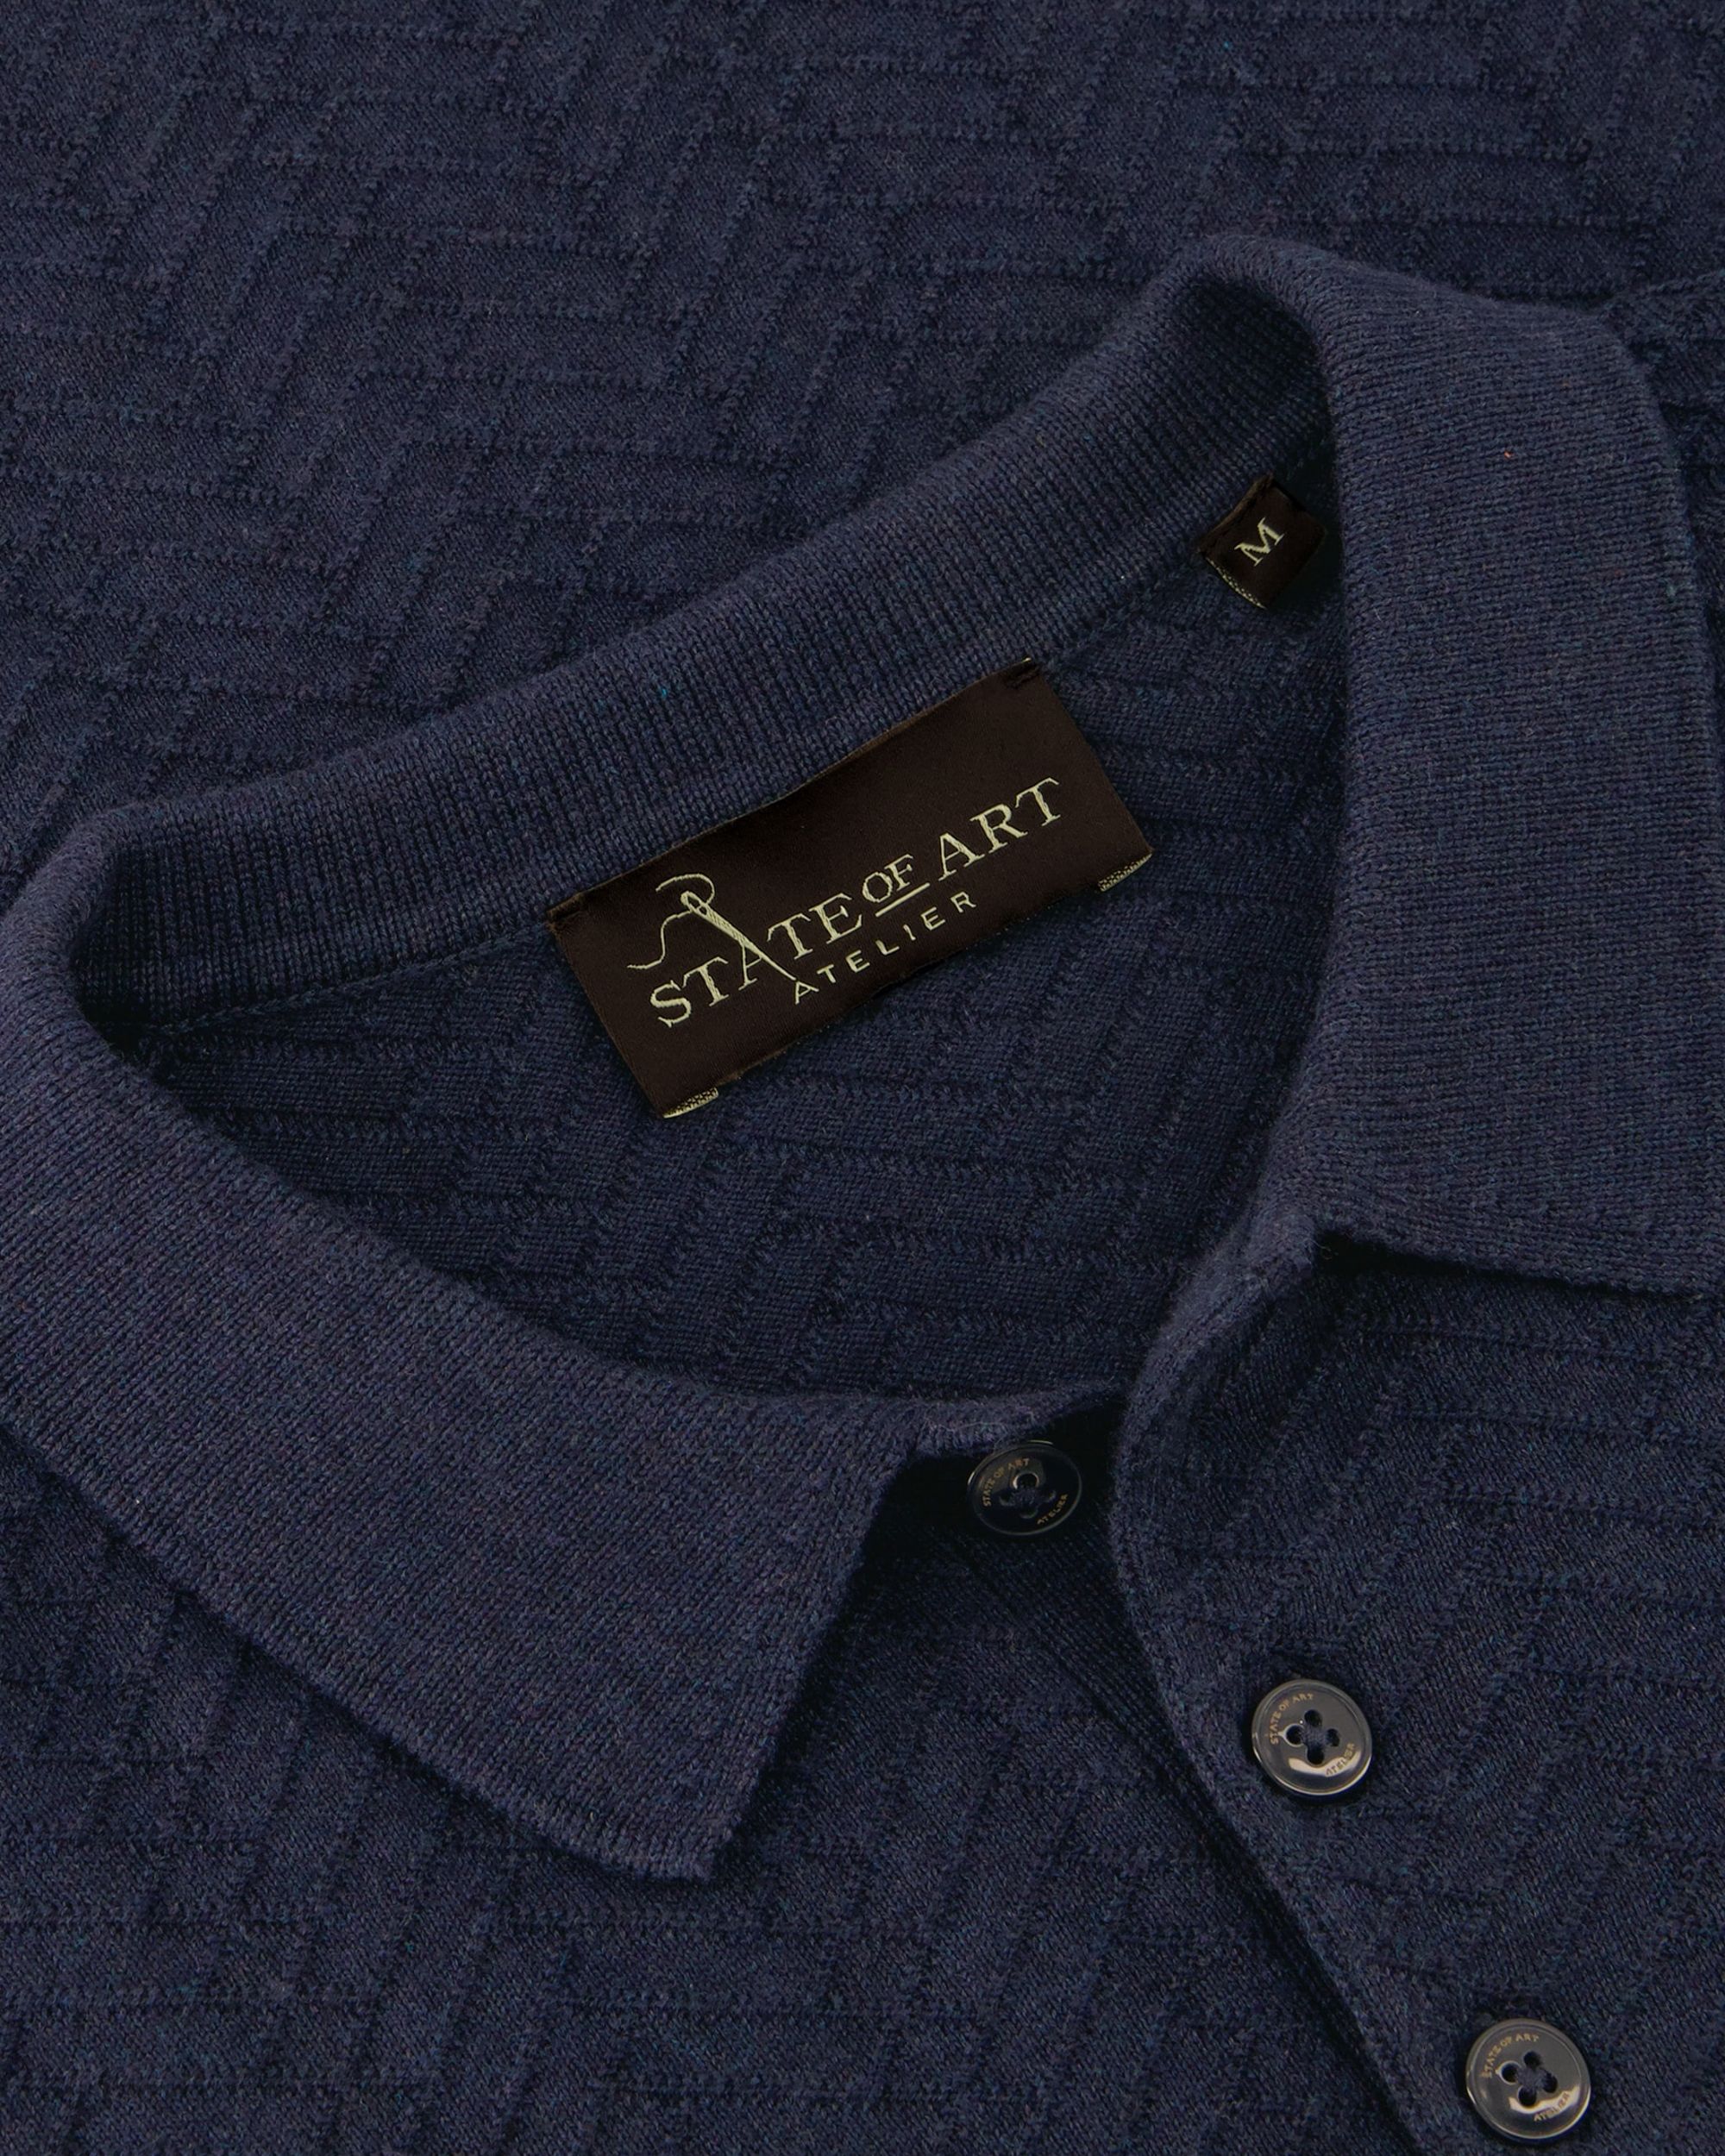 State of Art Polo KM Navy 095076-002-4XL